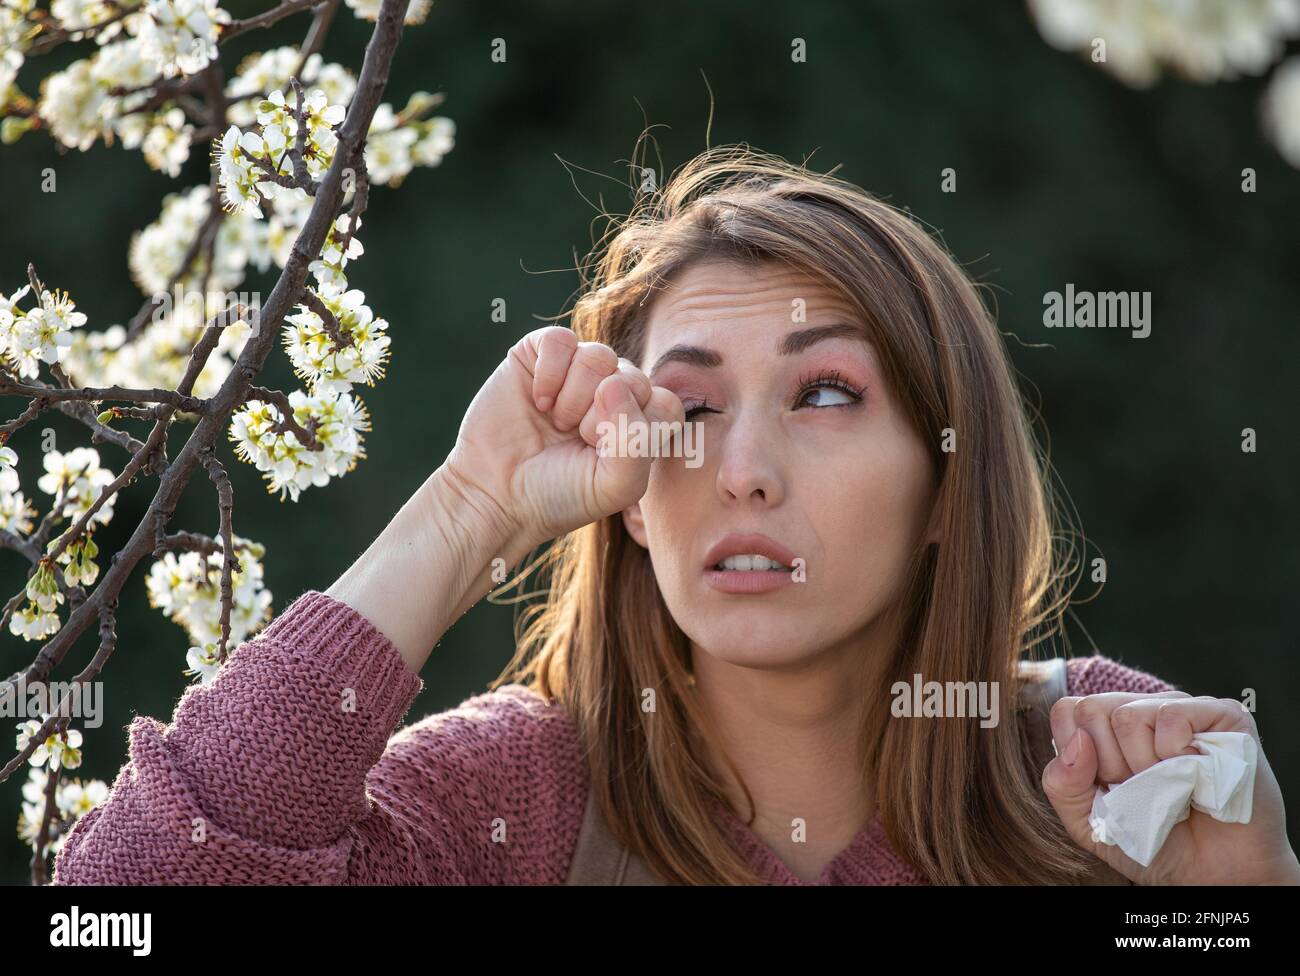 Young pretty girl rubbing eyes beside blooming tree in spring time. Itchy eyes from allergy Stock Photo